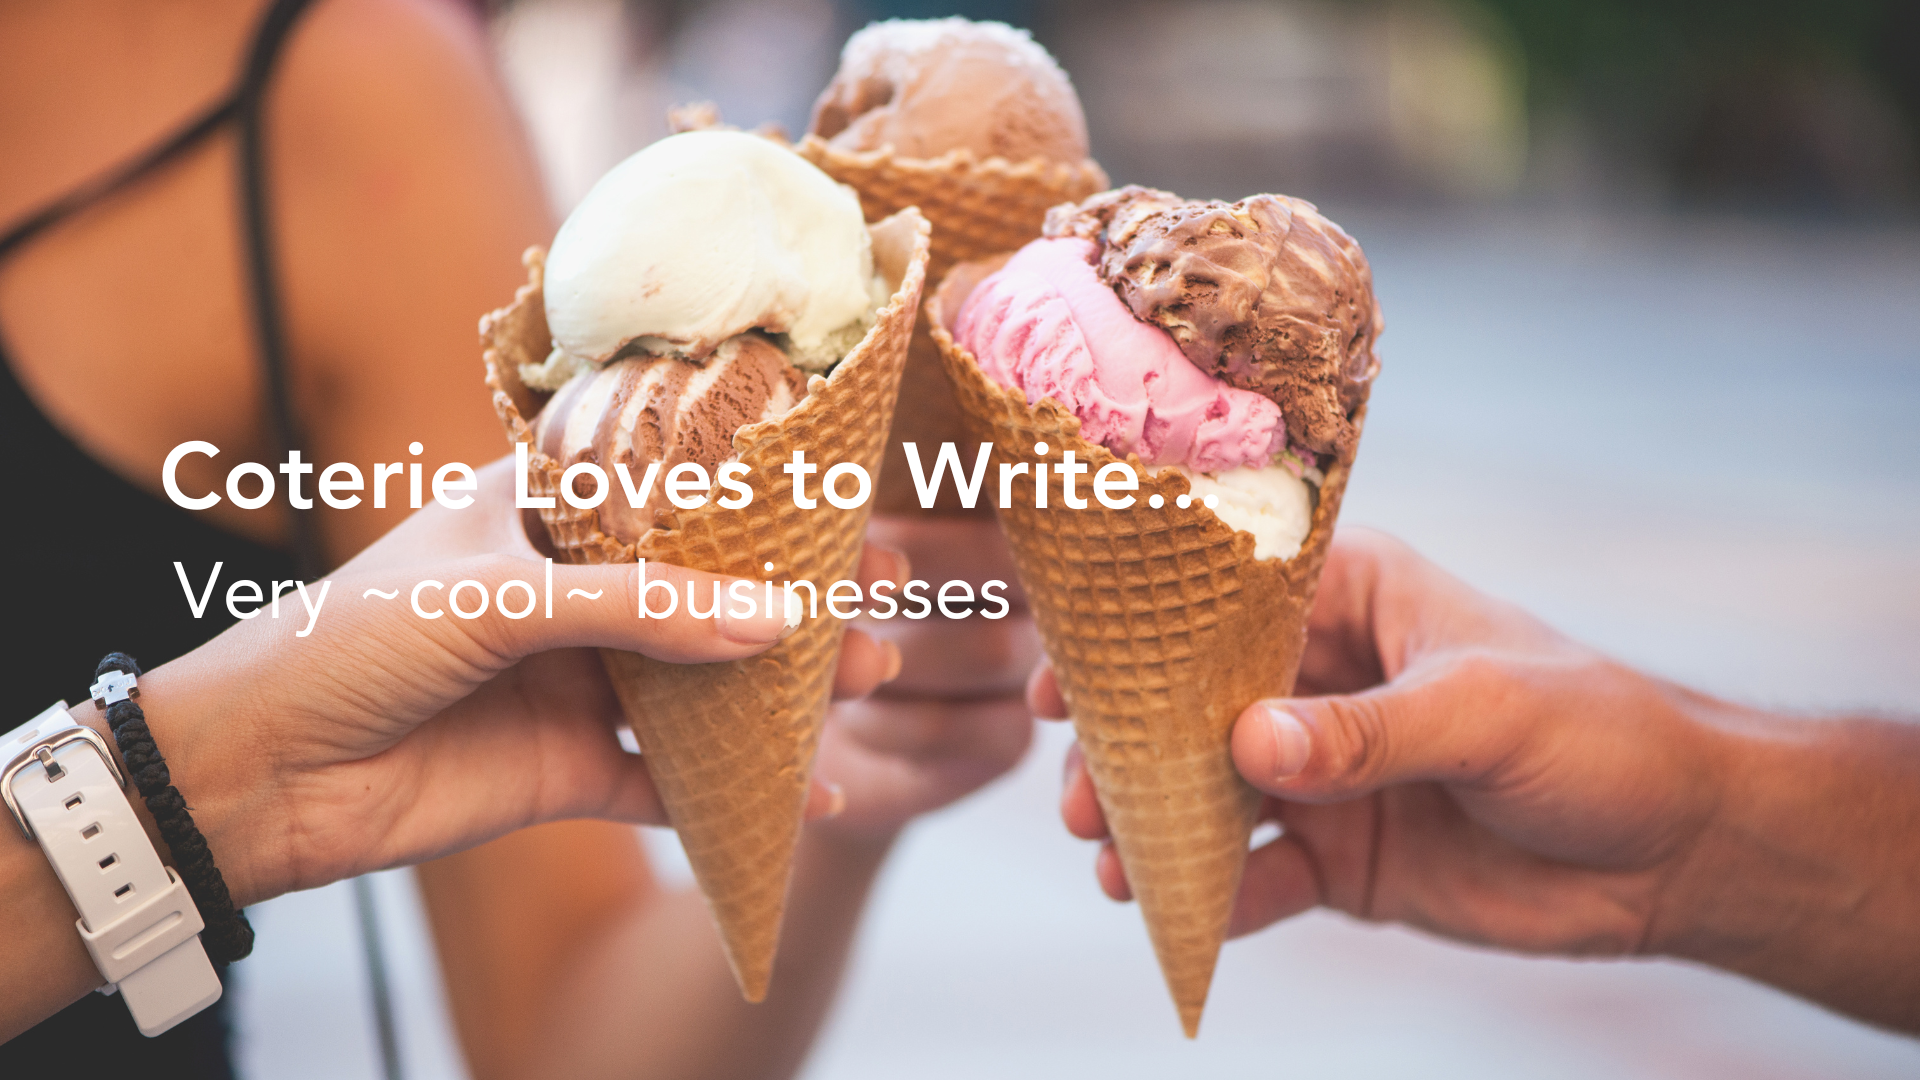 3 ice cream cones, coterie insurance writes business with ice cream shops, ice cream trucks and more